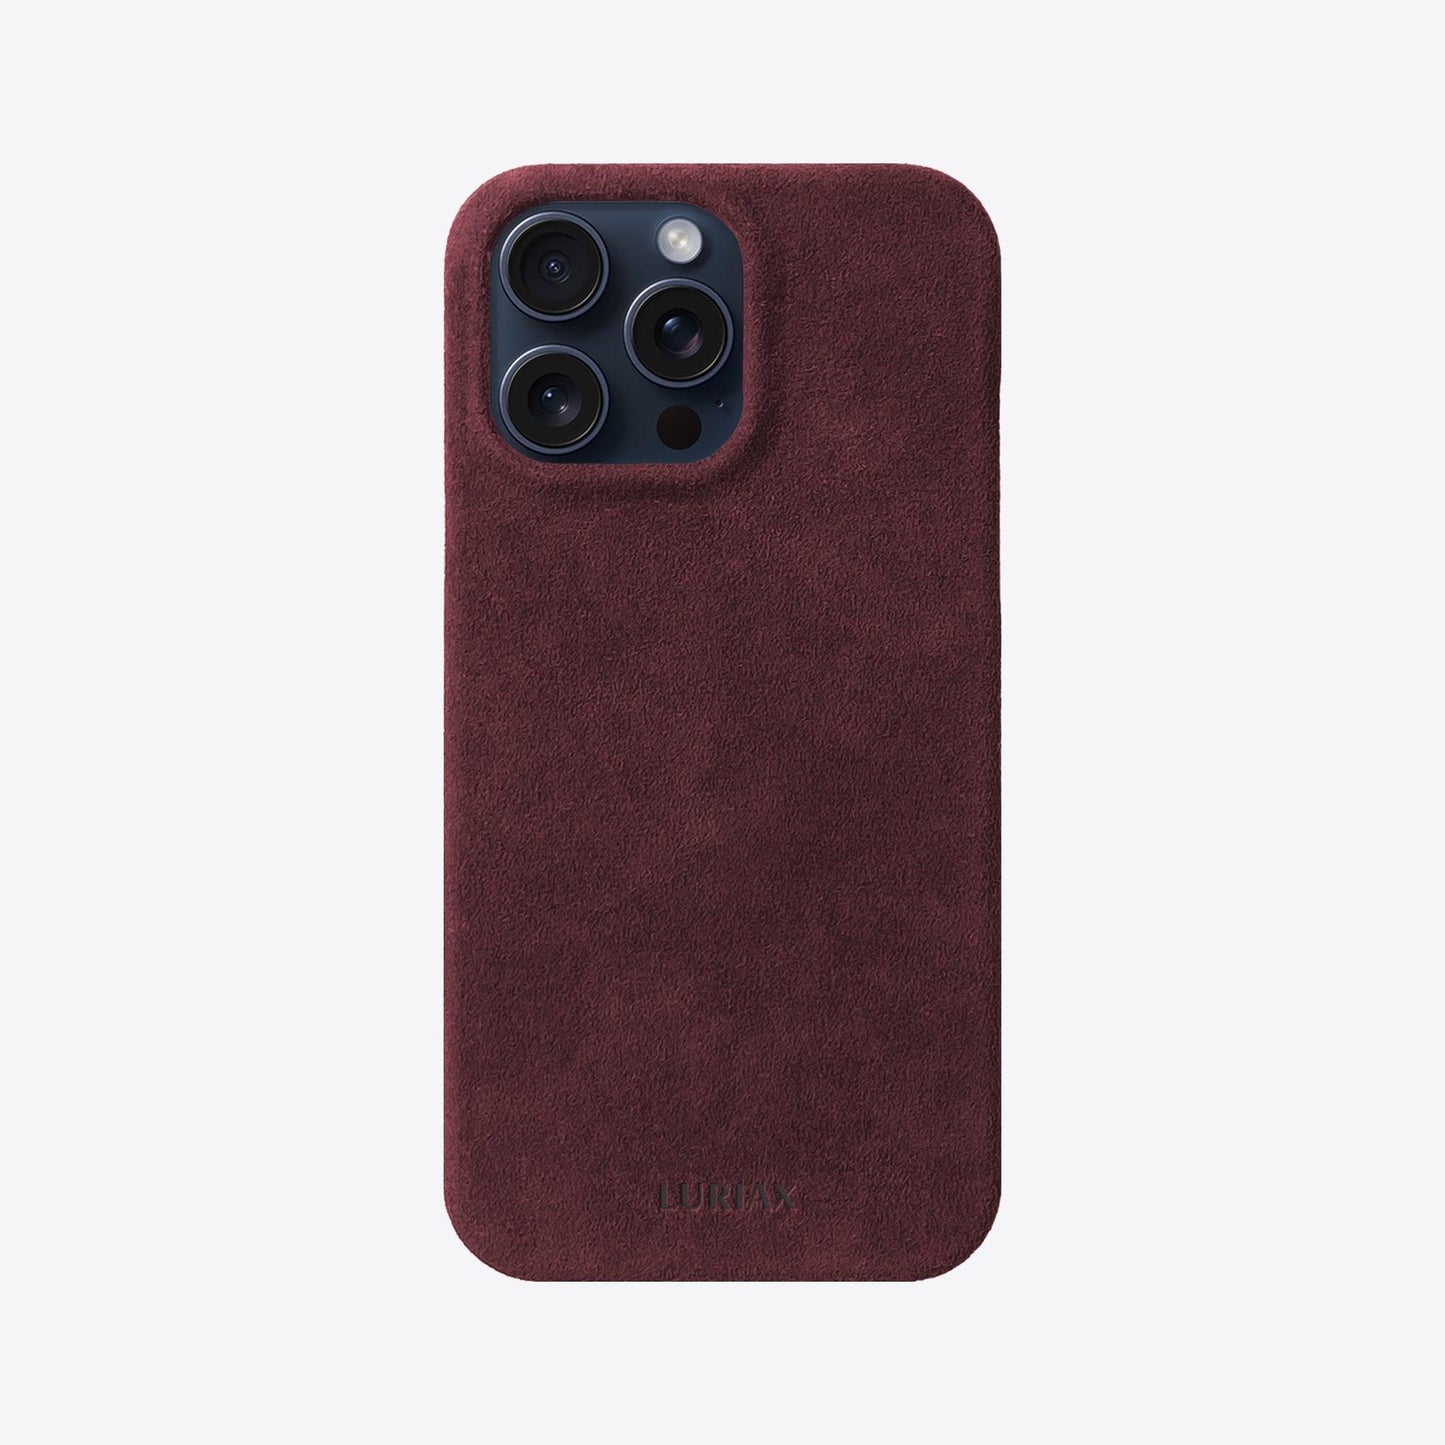 Alcantara Suede Leather iPhone Case and Accessories Collection - The Sport iPhone Case - Bordeaux - Luriax